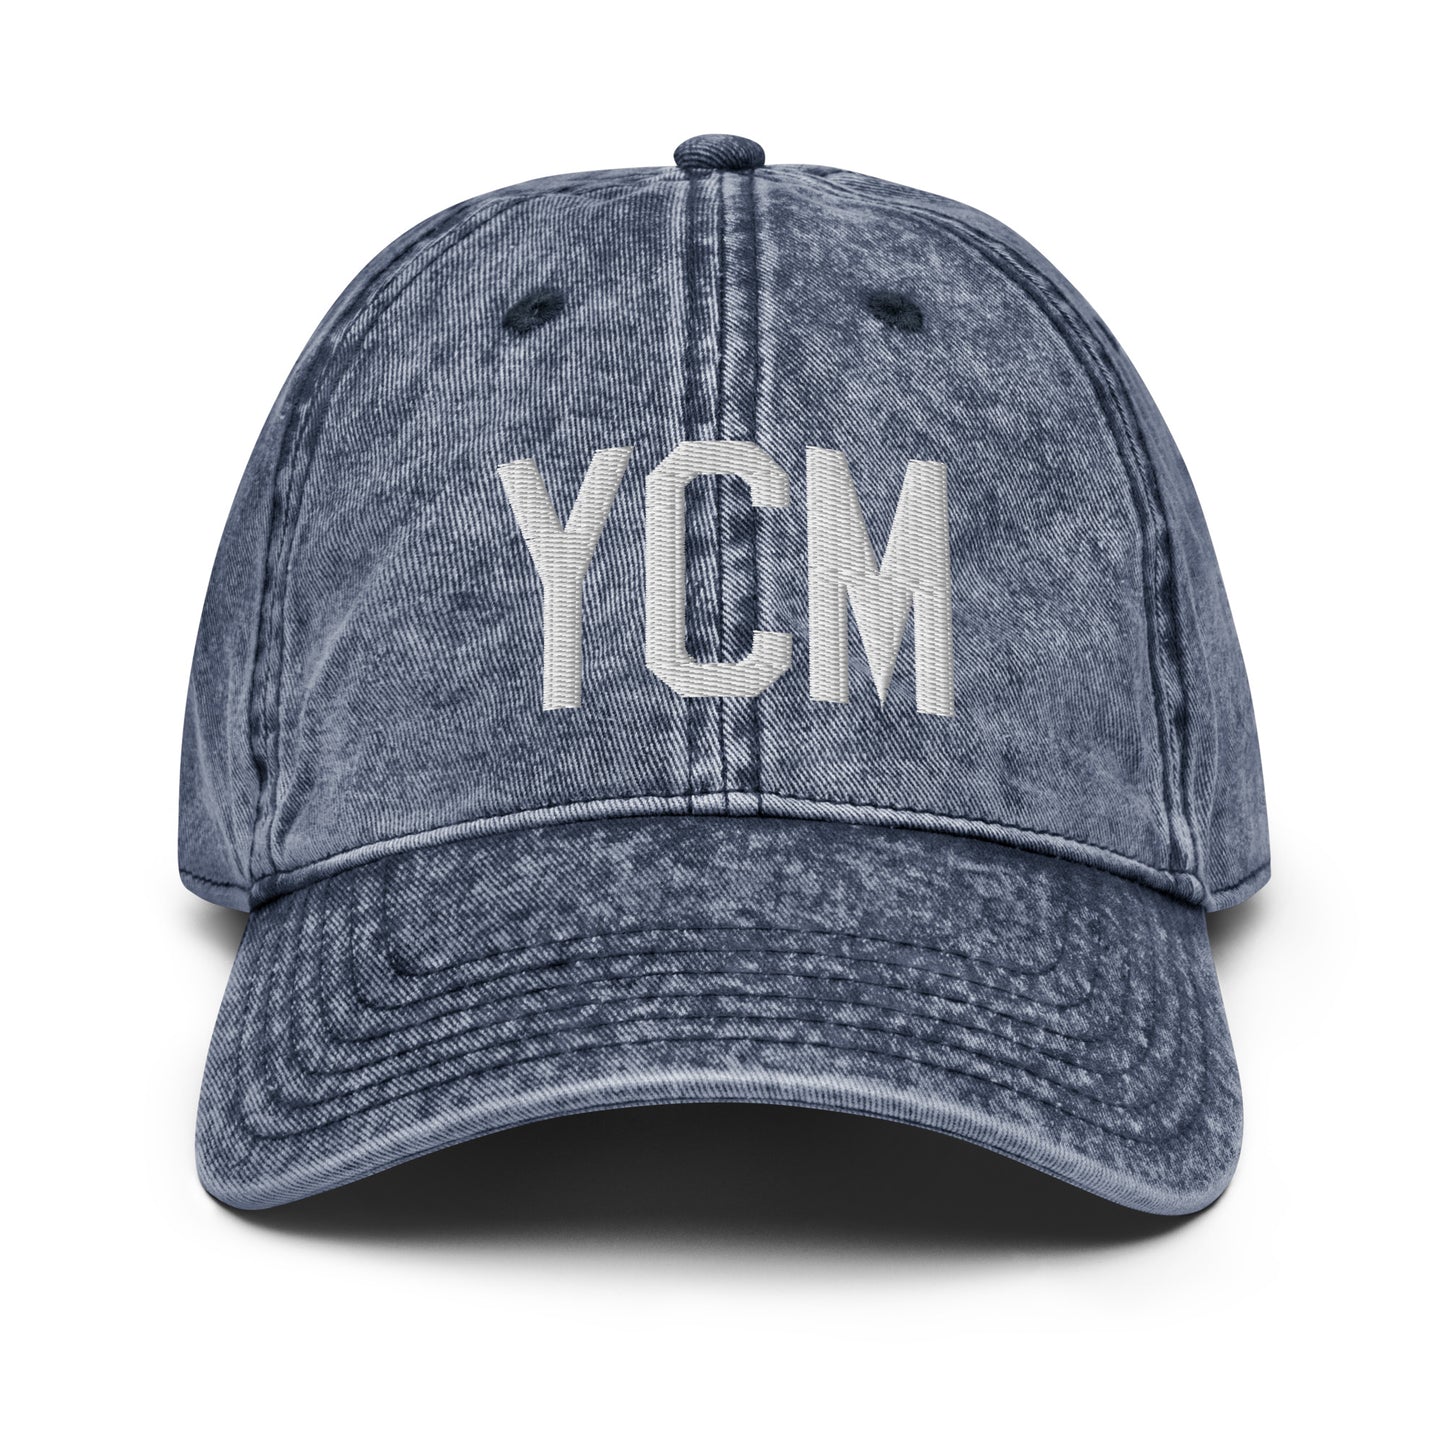 Airport Code Twill Cap - White • YCM St. Catharines • YHM Designs - Image 16